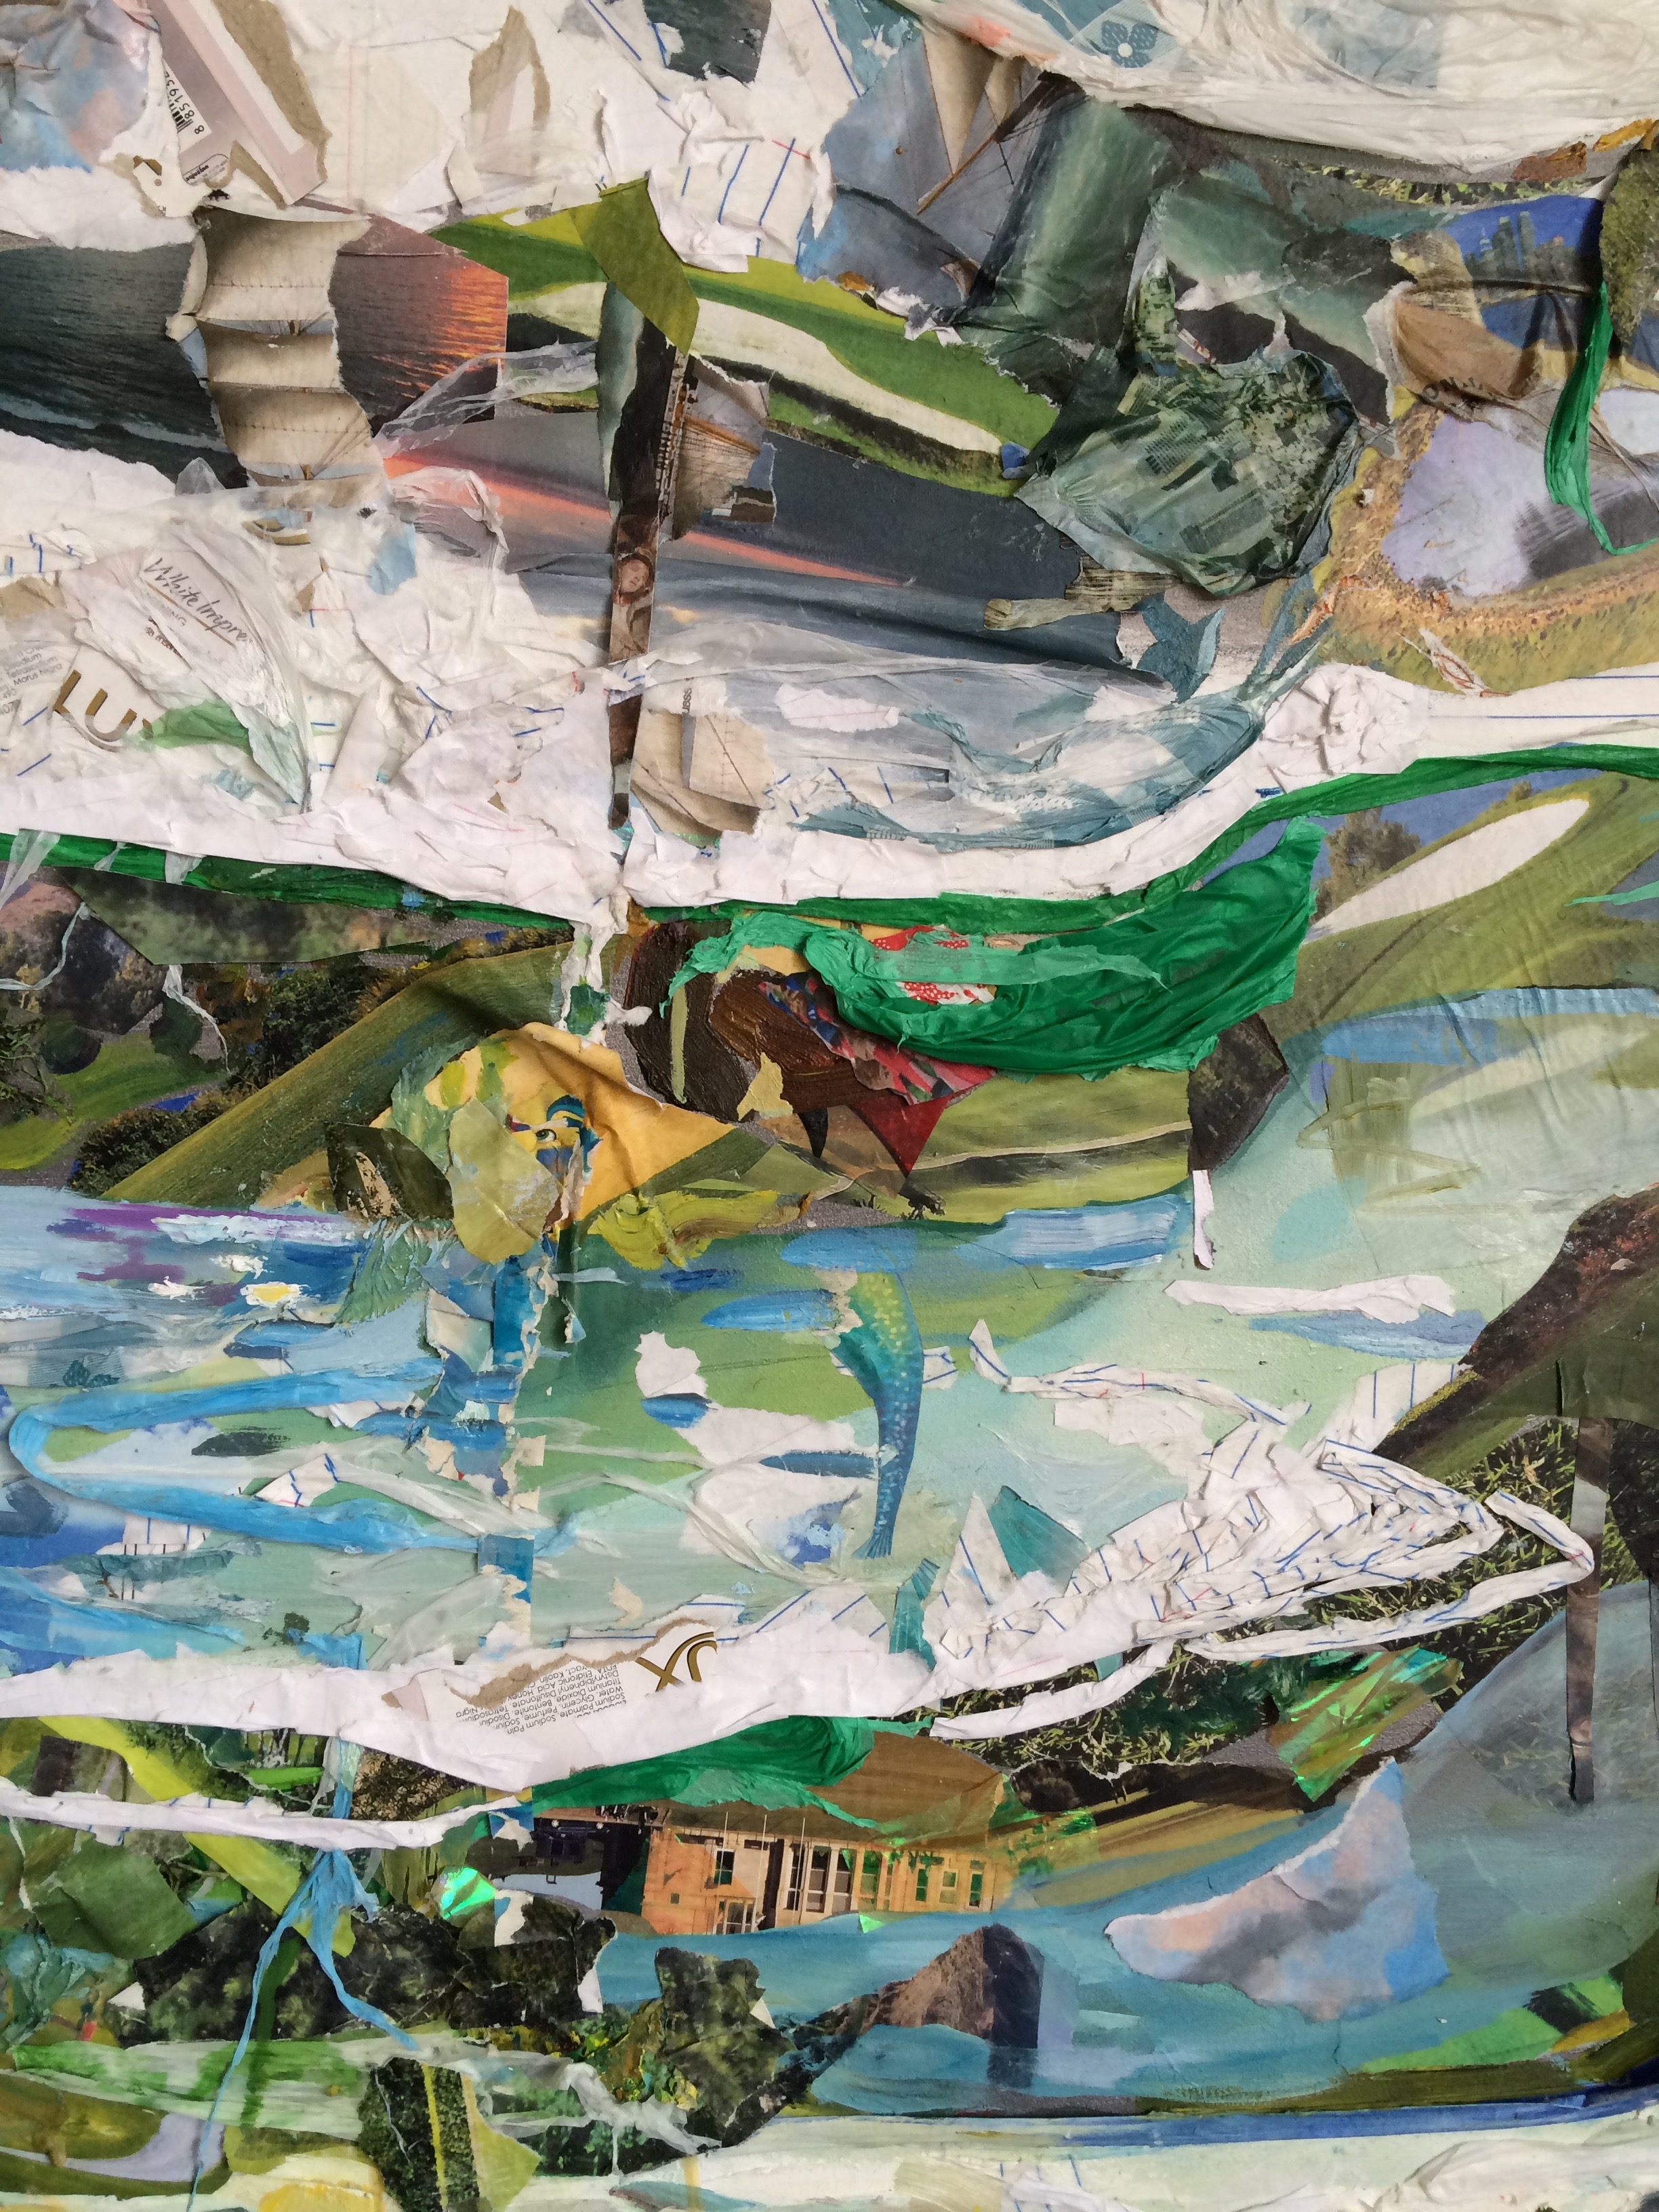   Tiers  (detail) ,&nbsp; 2015, oil, notebook paper, golf course calendars, skin whitening soap boxes, photos, and plastic on board, 48 x 60 inches 